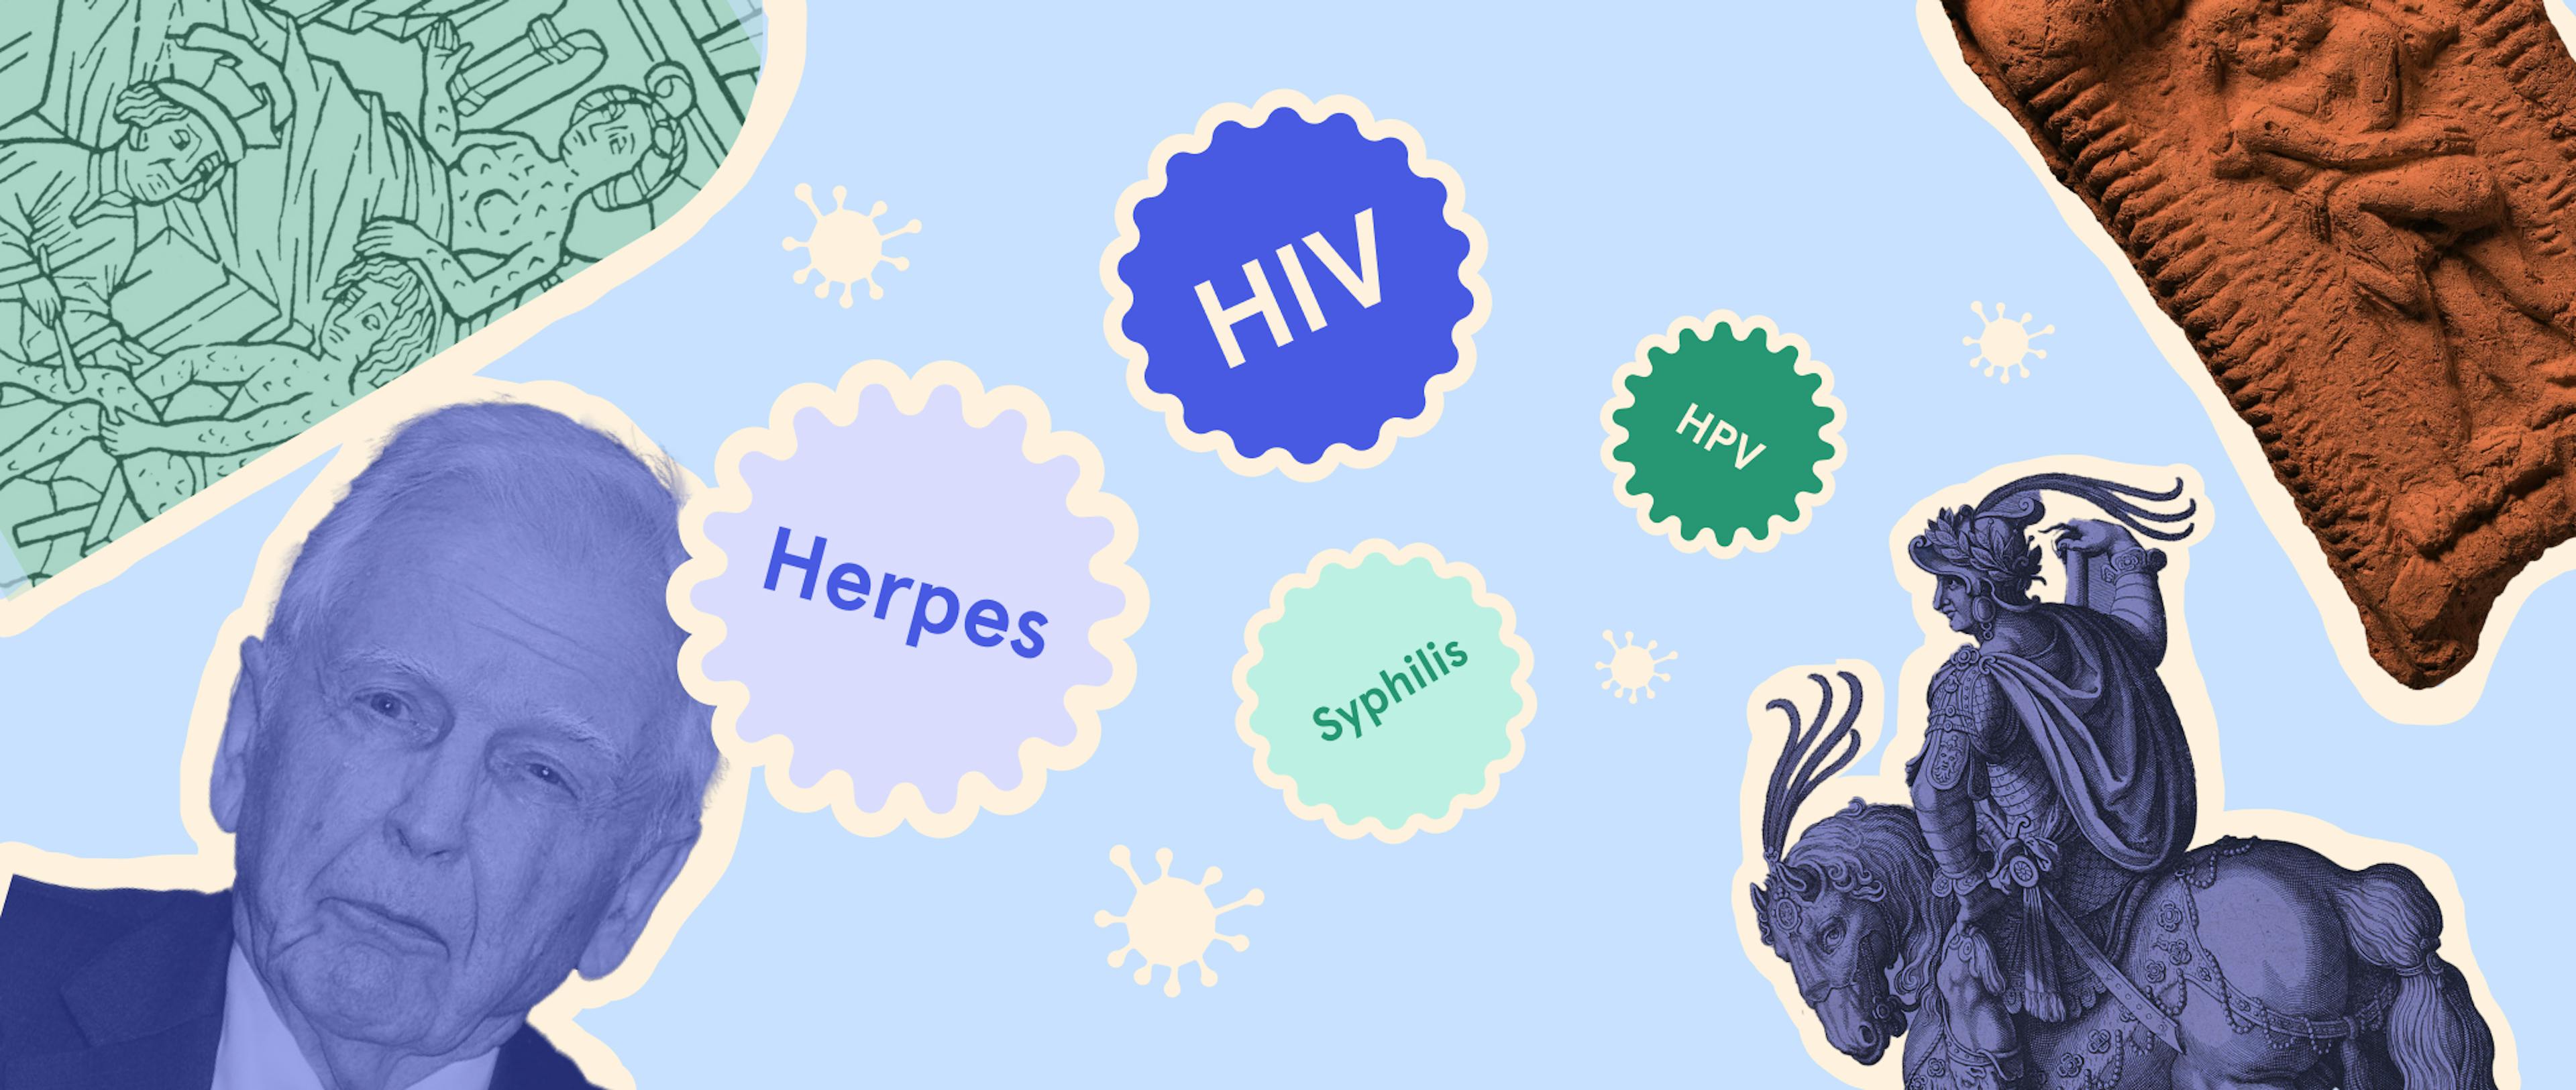 Visual representation of the history of sexually transmitted infections such as HIV, HPV, herpes, syphilis, and chlamydia